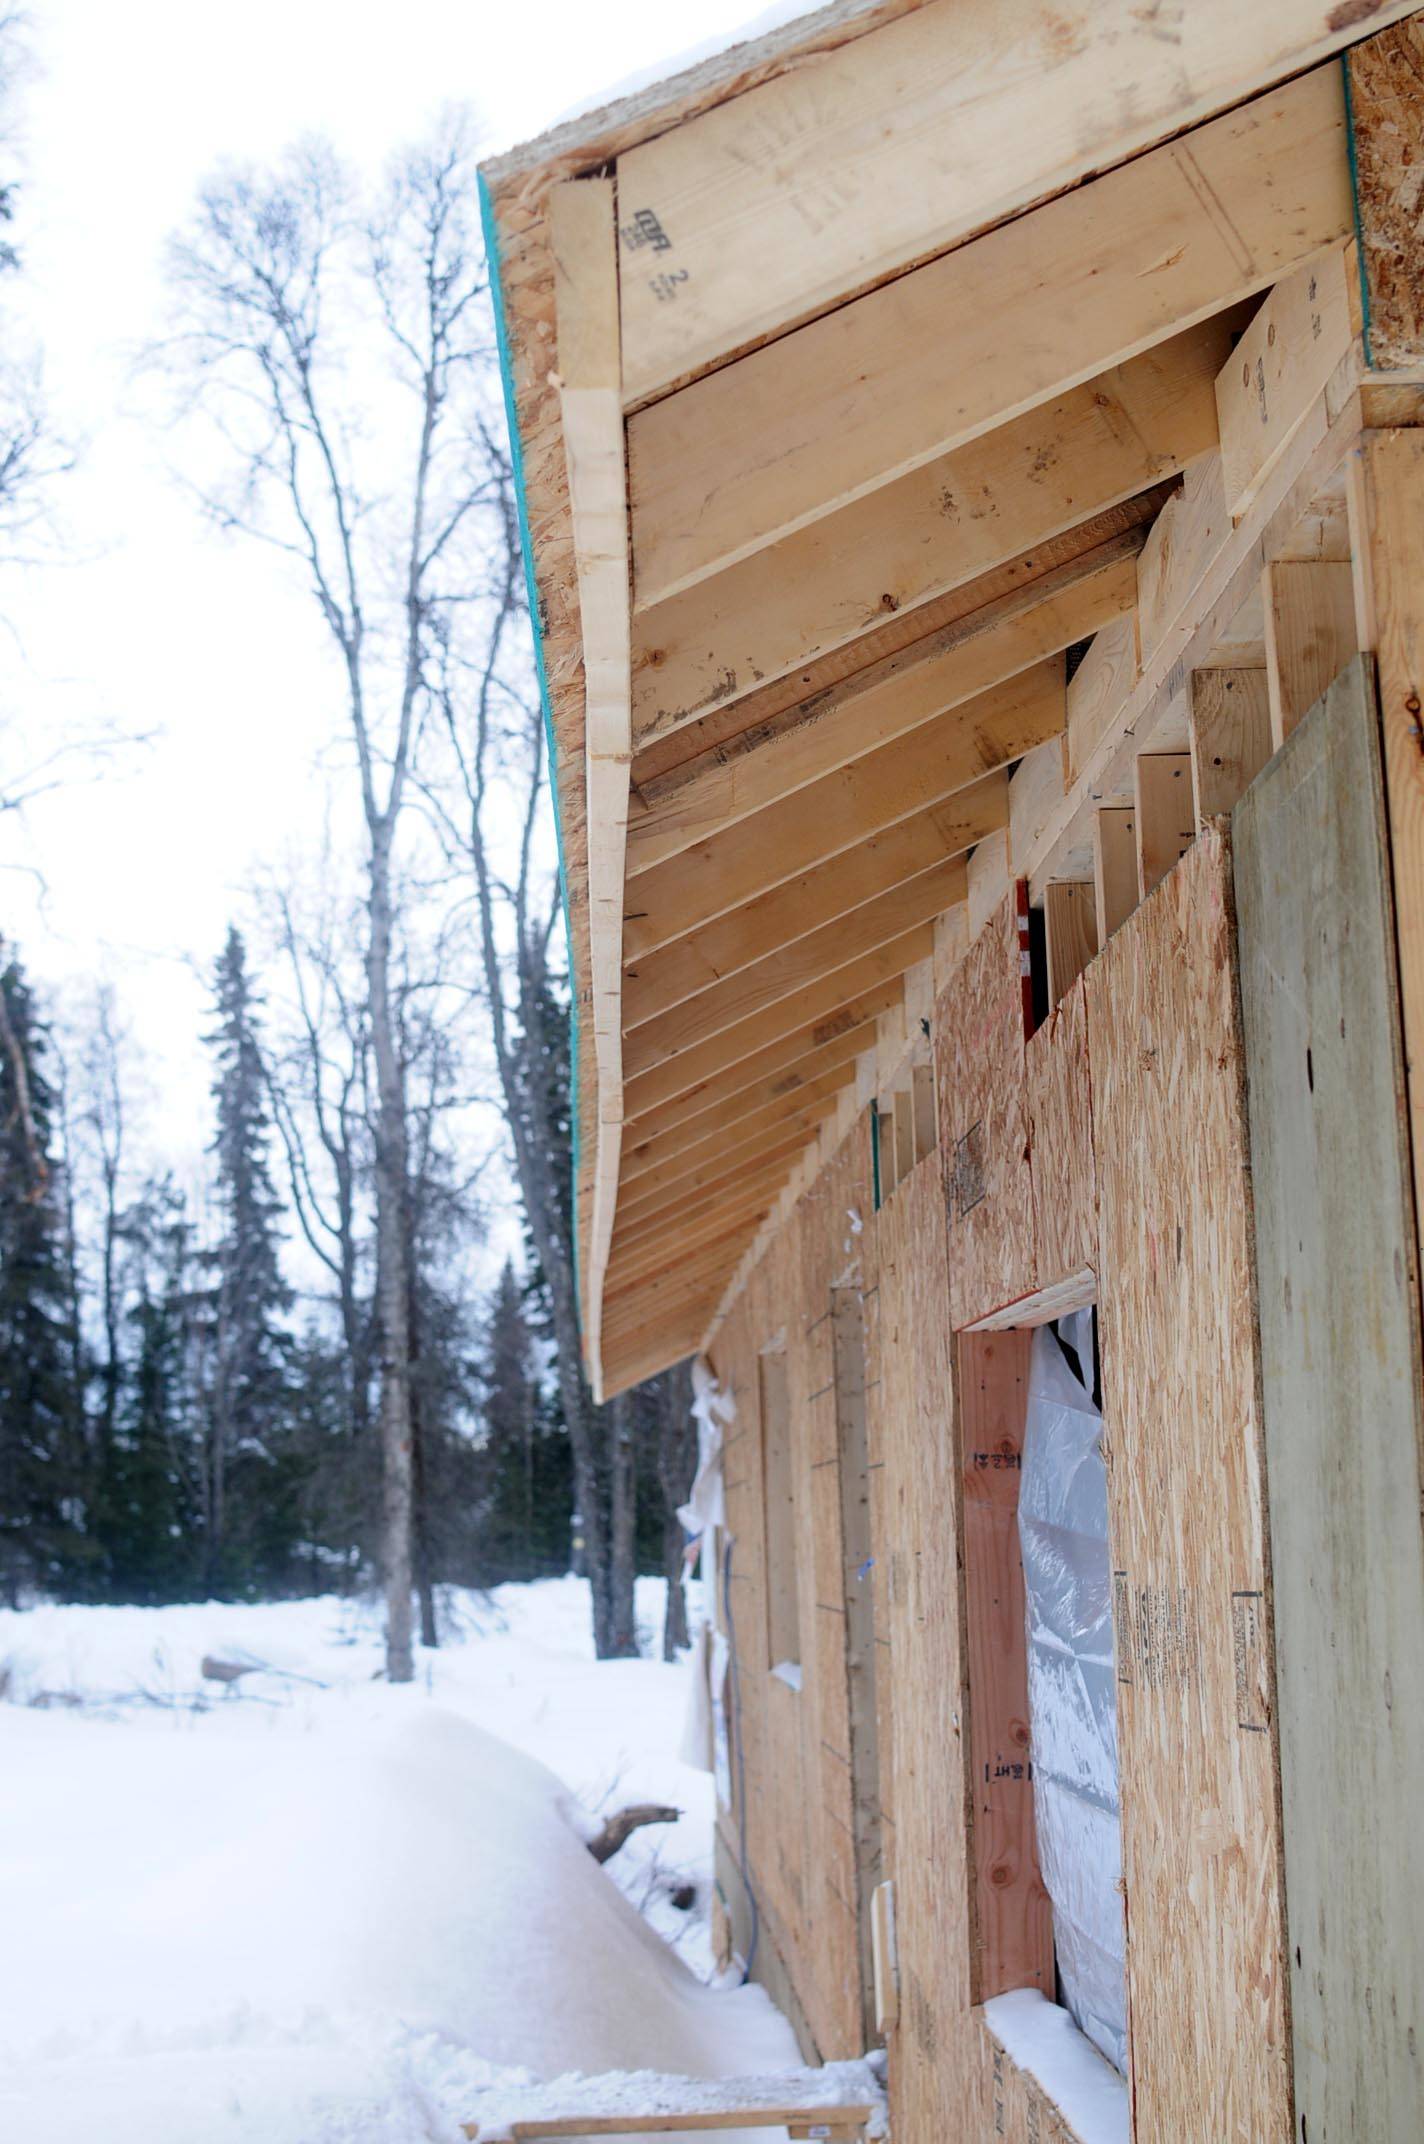 The outer fascia of the roof on Kimbra Mensch’s house is warped on Friday, March 9, 2018 in Nikiski, Alaska. Mensch, who moved to Nikiski from Wasill, engaged a contractor to build her a home on Cabin Lake but is now having to tear it down because of mistakes in the construction. (Photo by Elizabeth Earl/Peninsula Clarion)